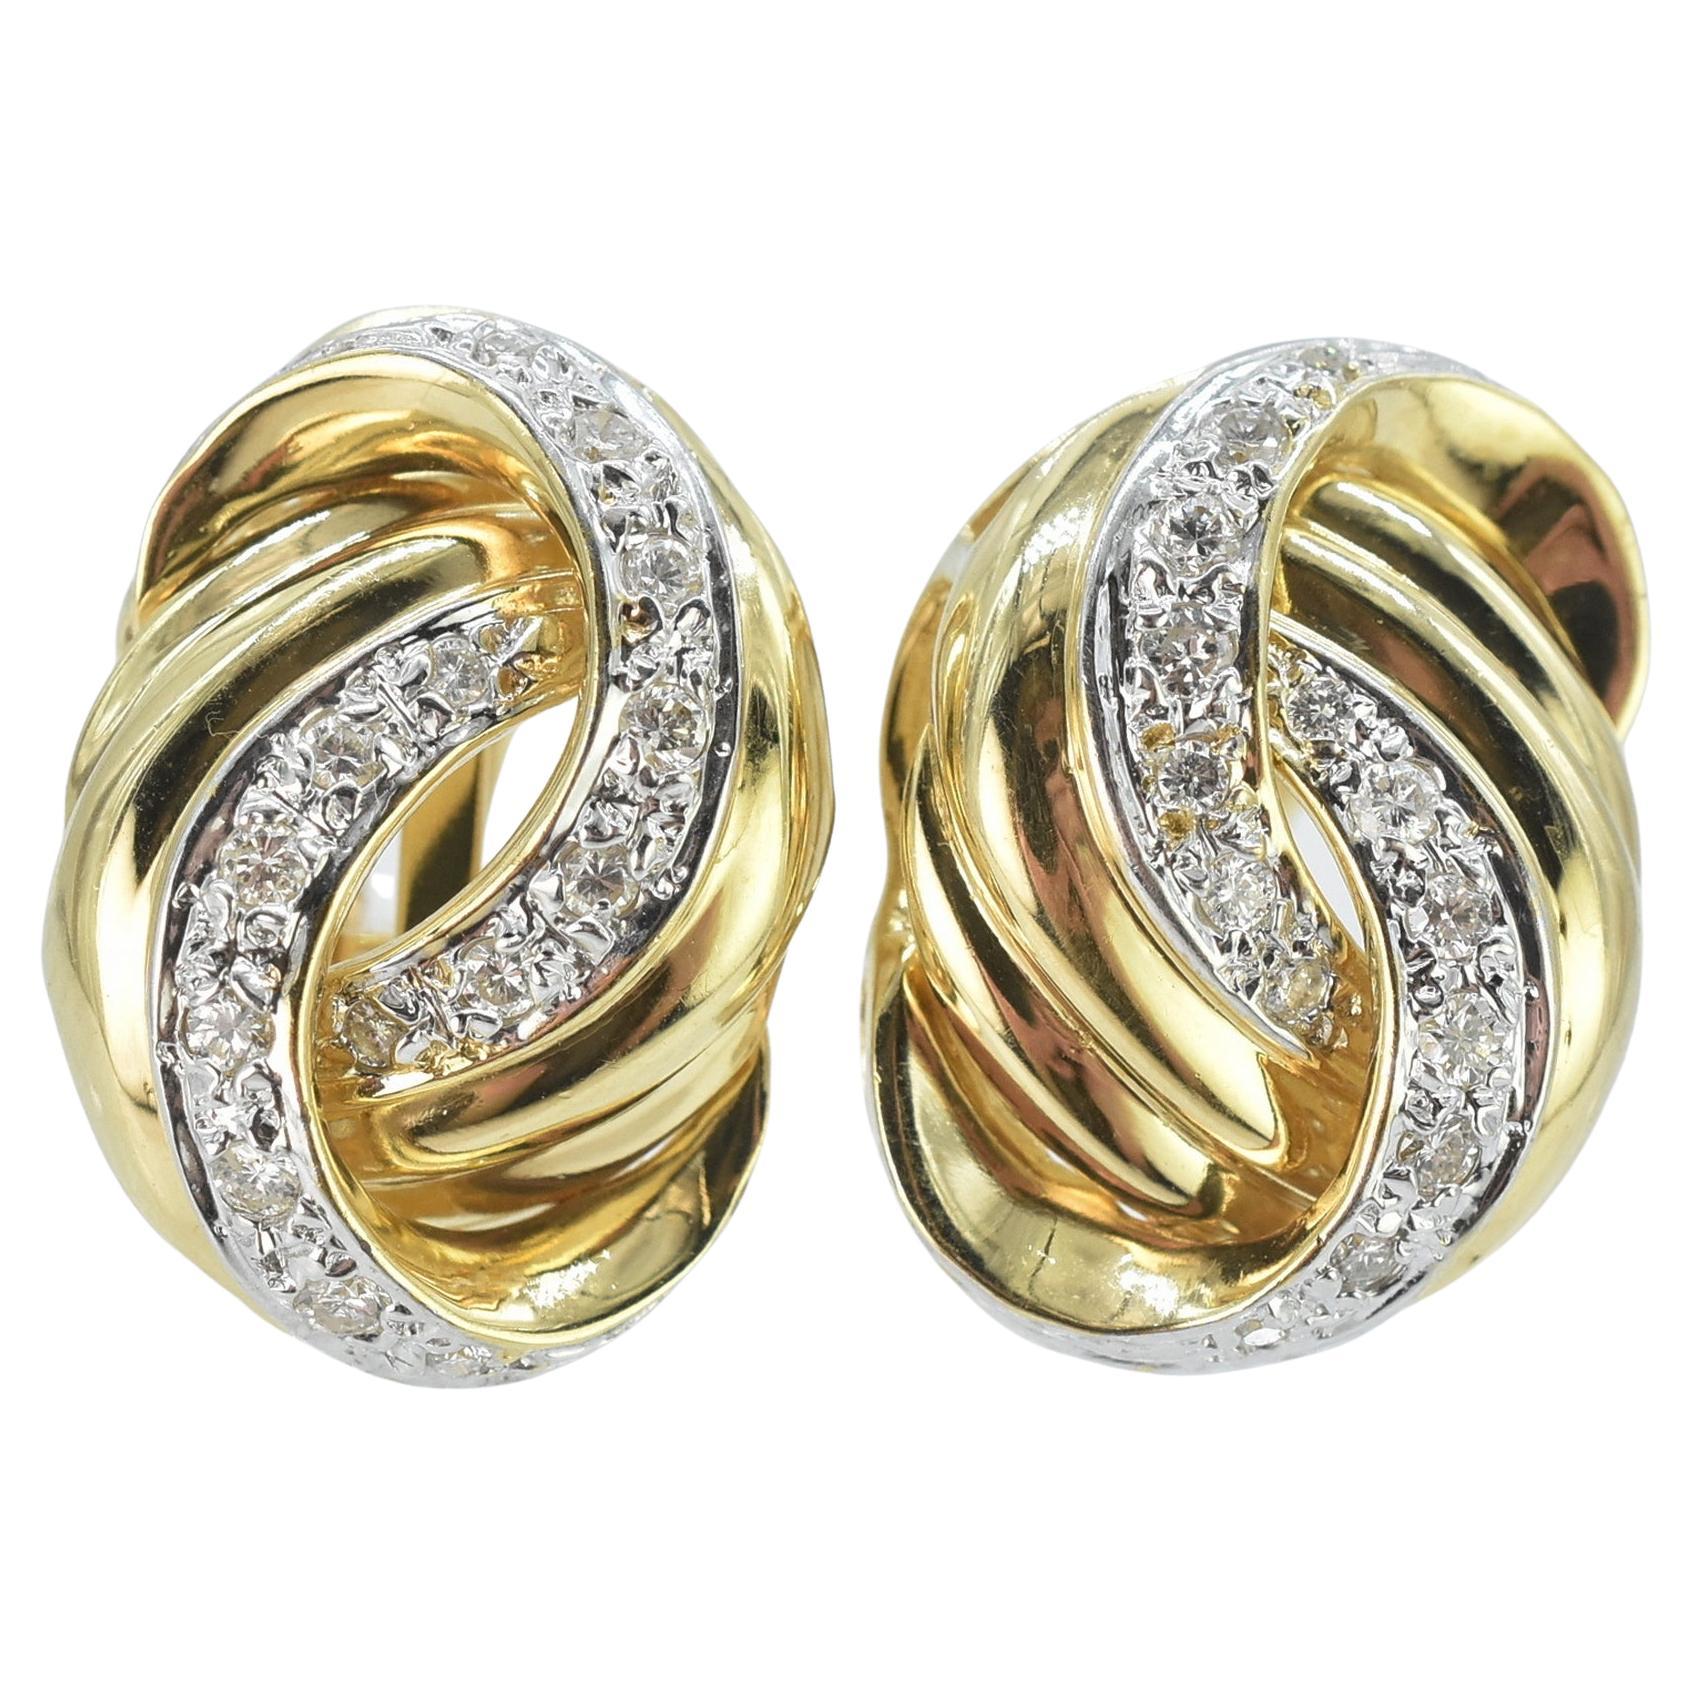 14k Gold and 1.5cttw Diamond Knot Earrings For Sale